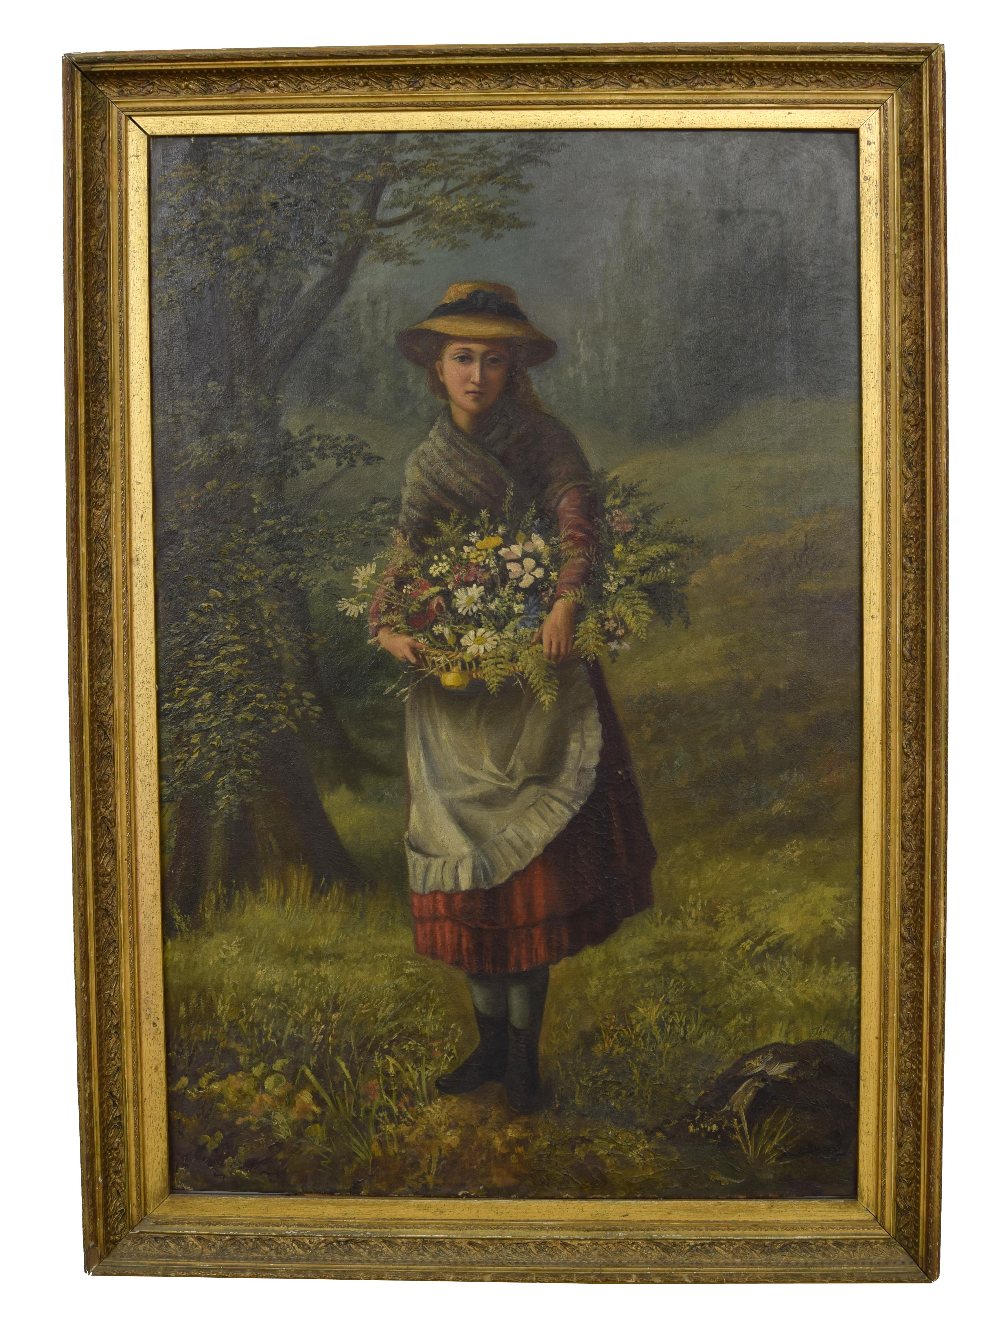 English School (19th century) - Country girl holding a basket of flowers, oil on canvas, 36" x 23" - Image 2 of 3